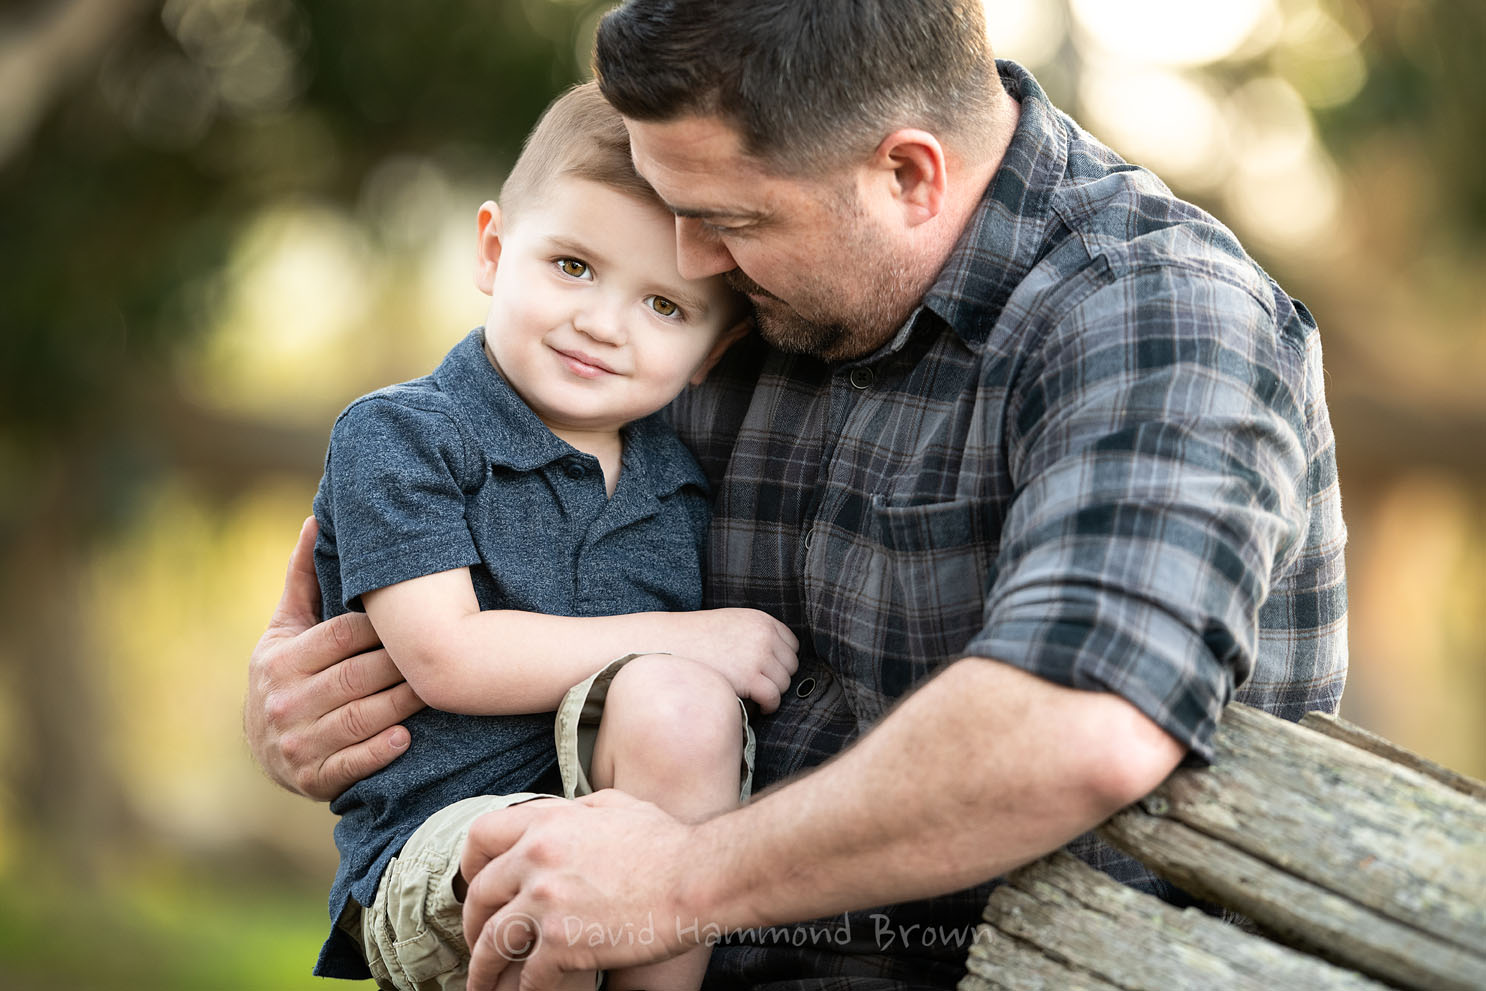 David Hammond Brown Photography - Father and Son